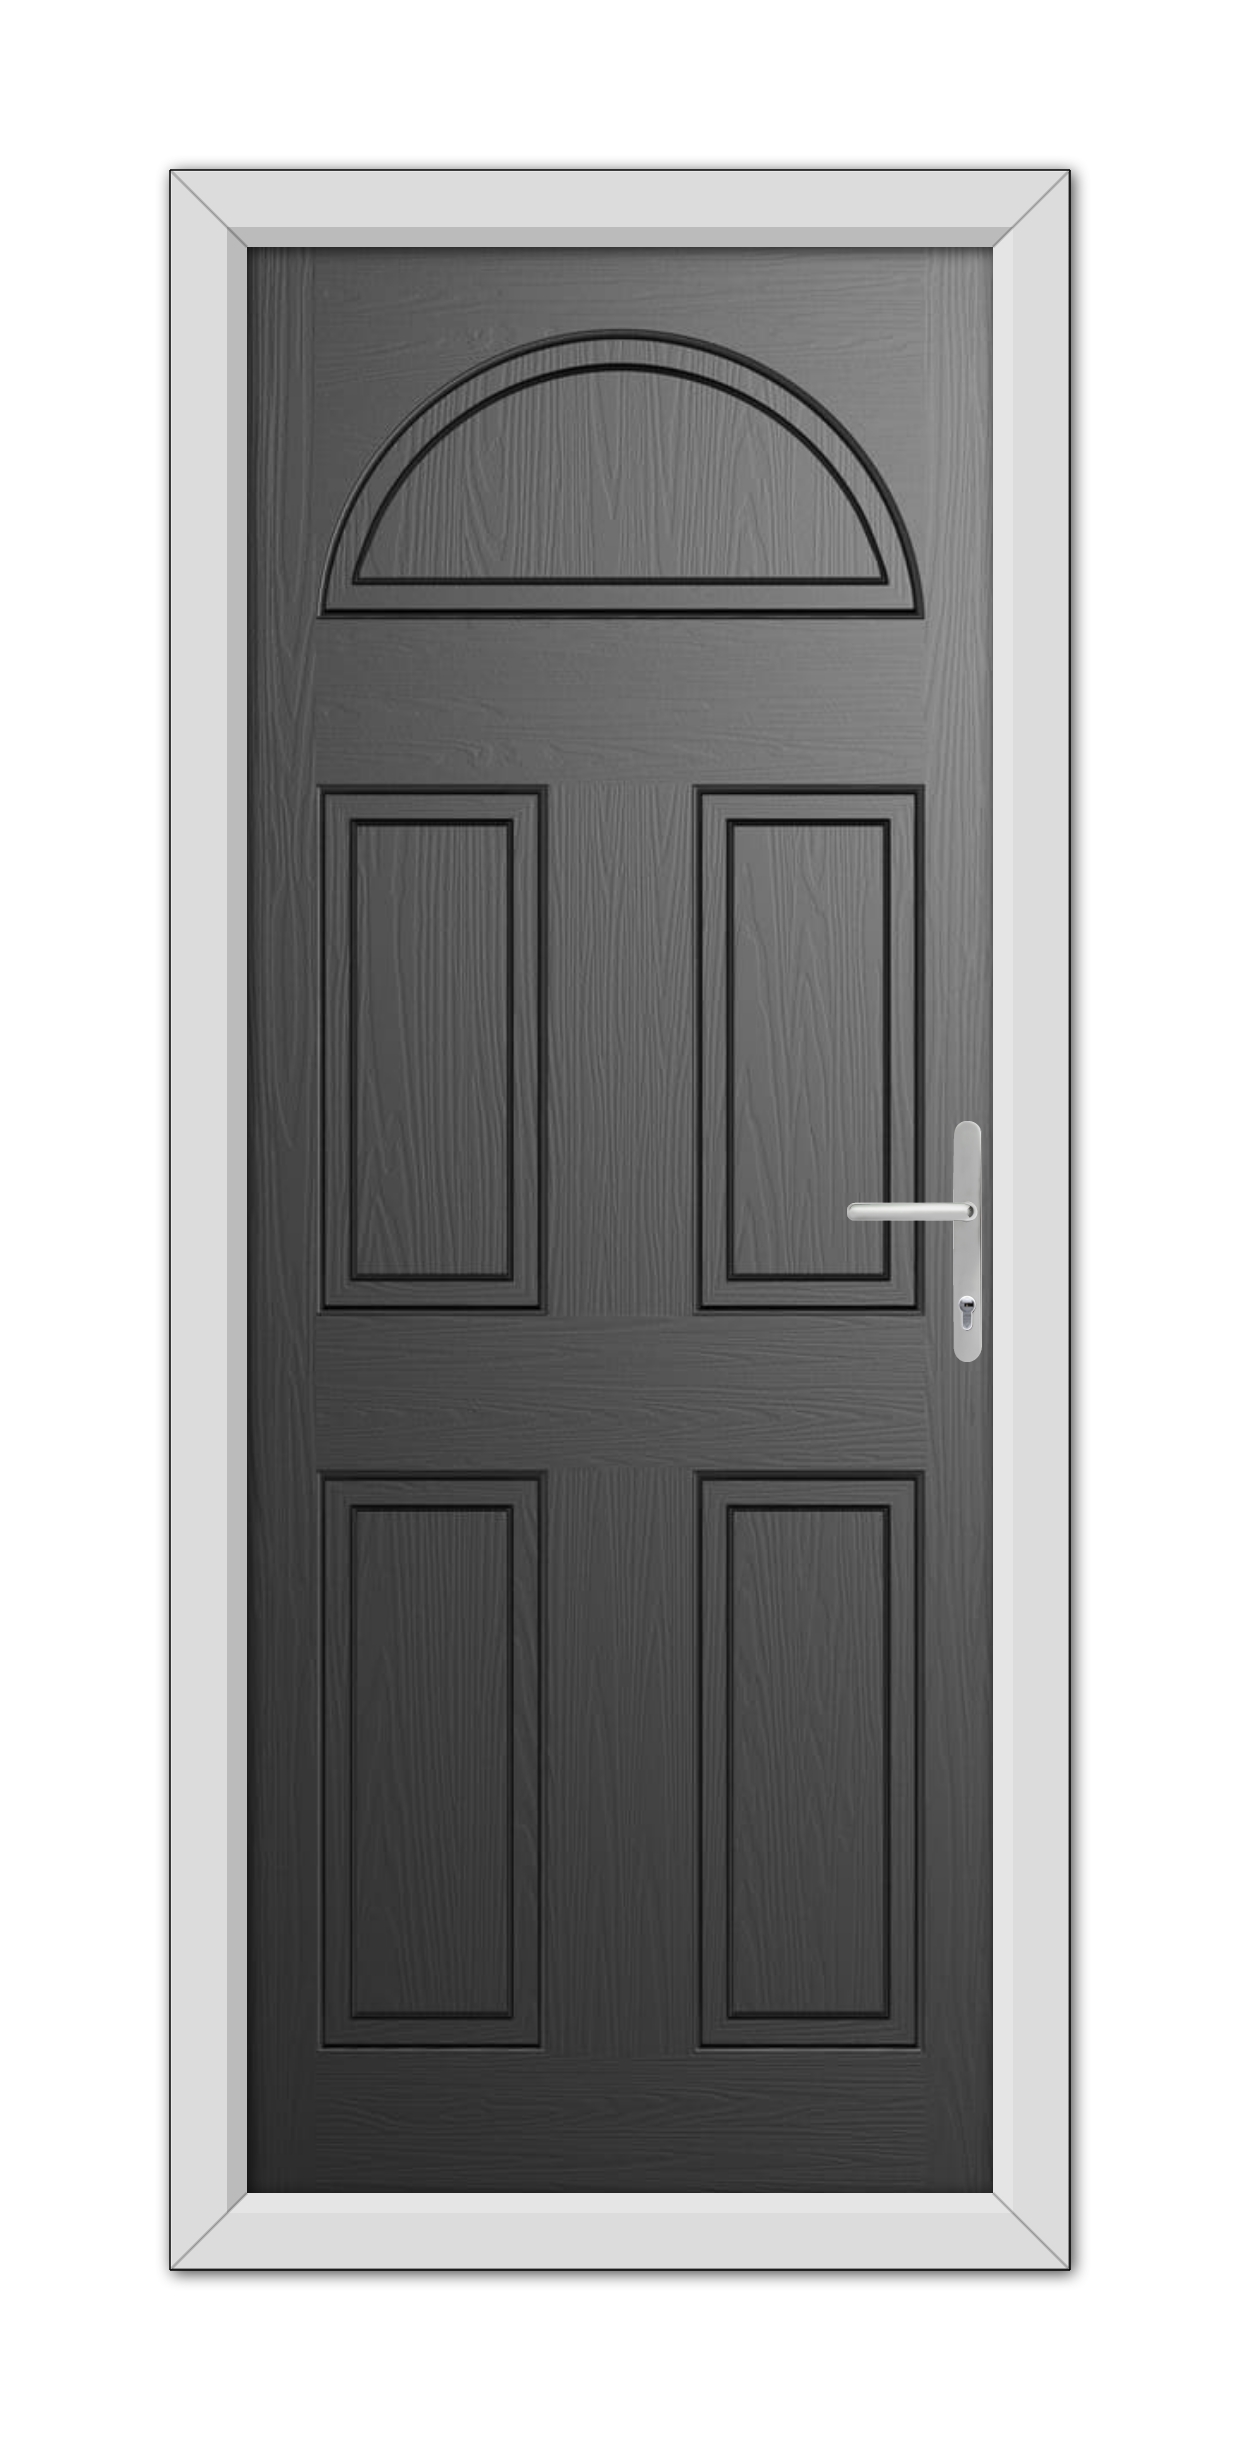 A modern Black Middleton Solid Stable Composite Door 48mm Timber Core with six panels and a silver handle, featuring a semicircular window at the top.